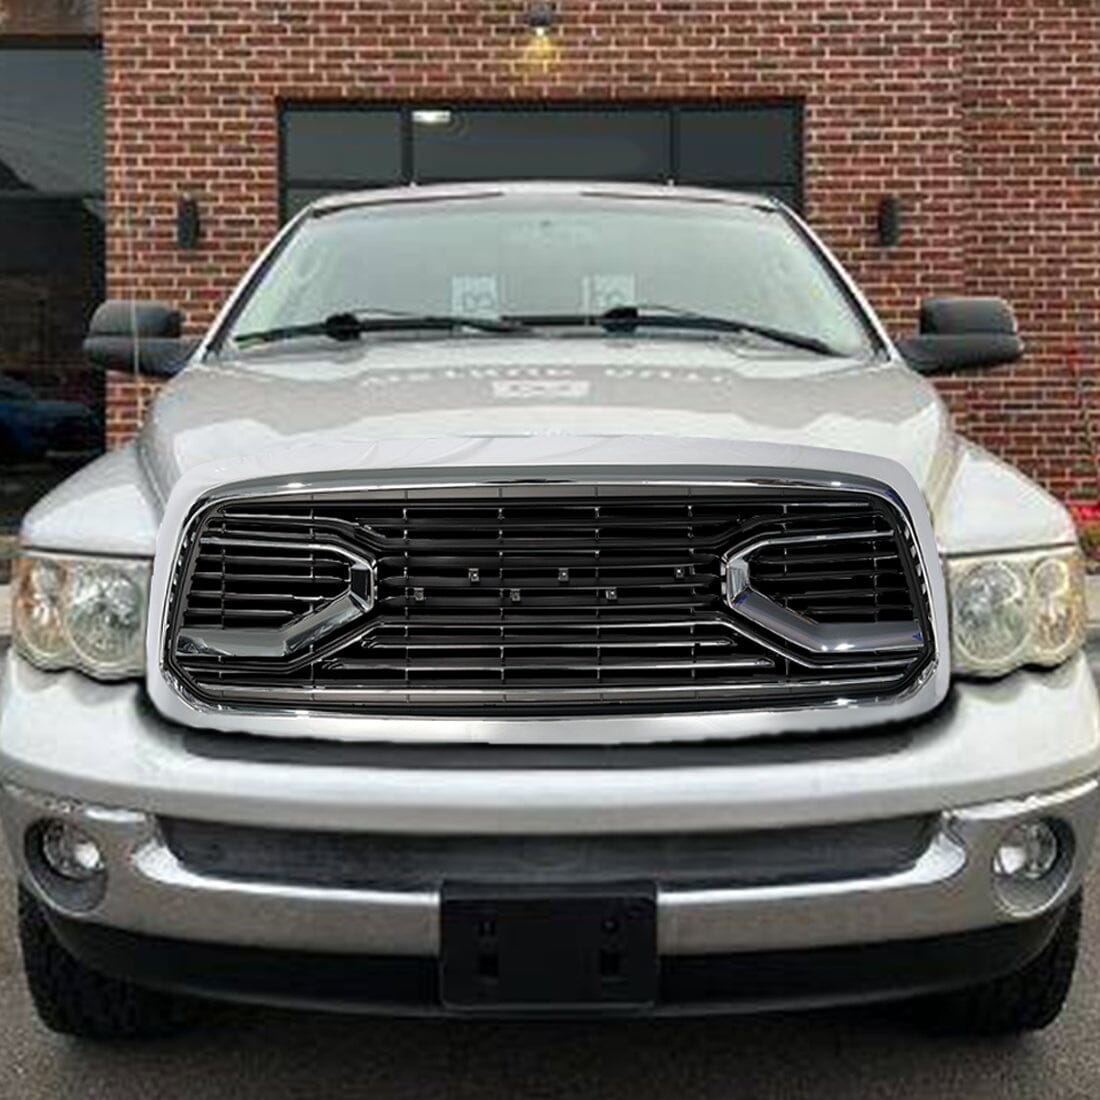 Chrome Big Horn Style Front Grille For 2013-2018 Dodge Ram 1500 | Amoffroad